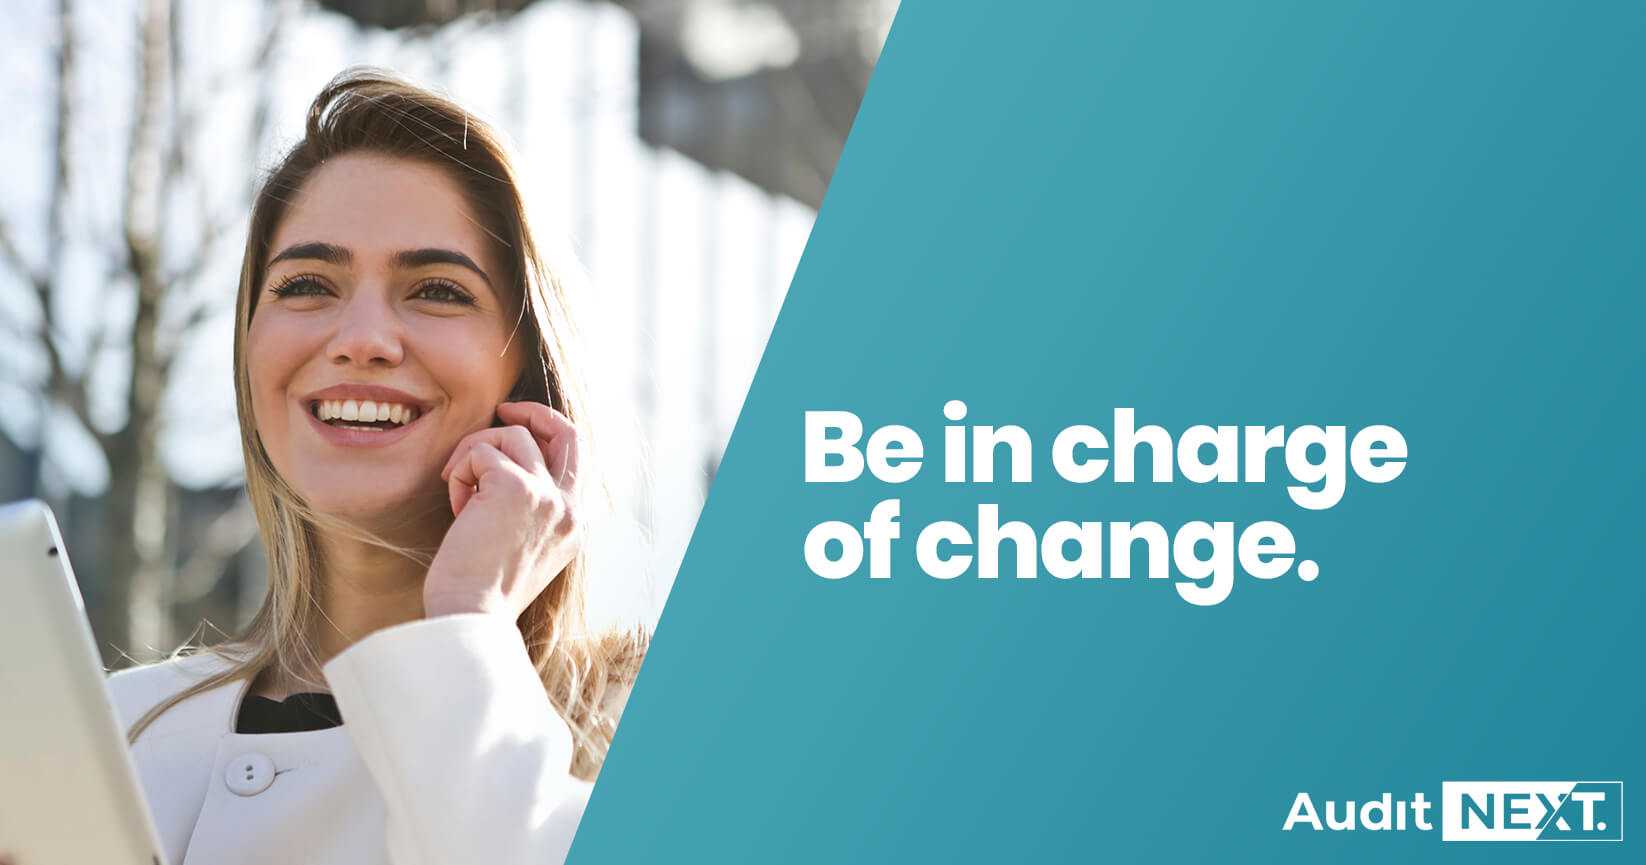 Be in charge of change